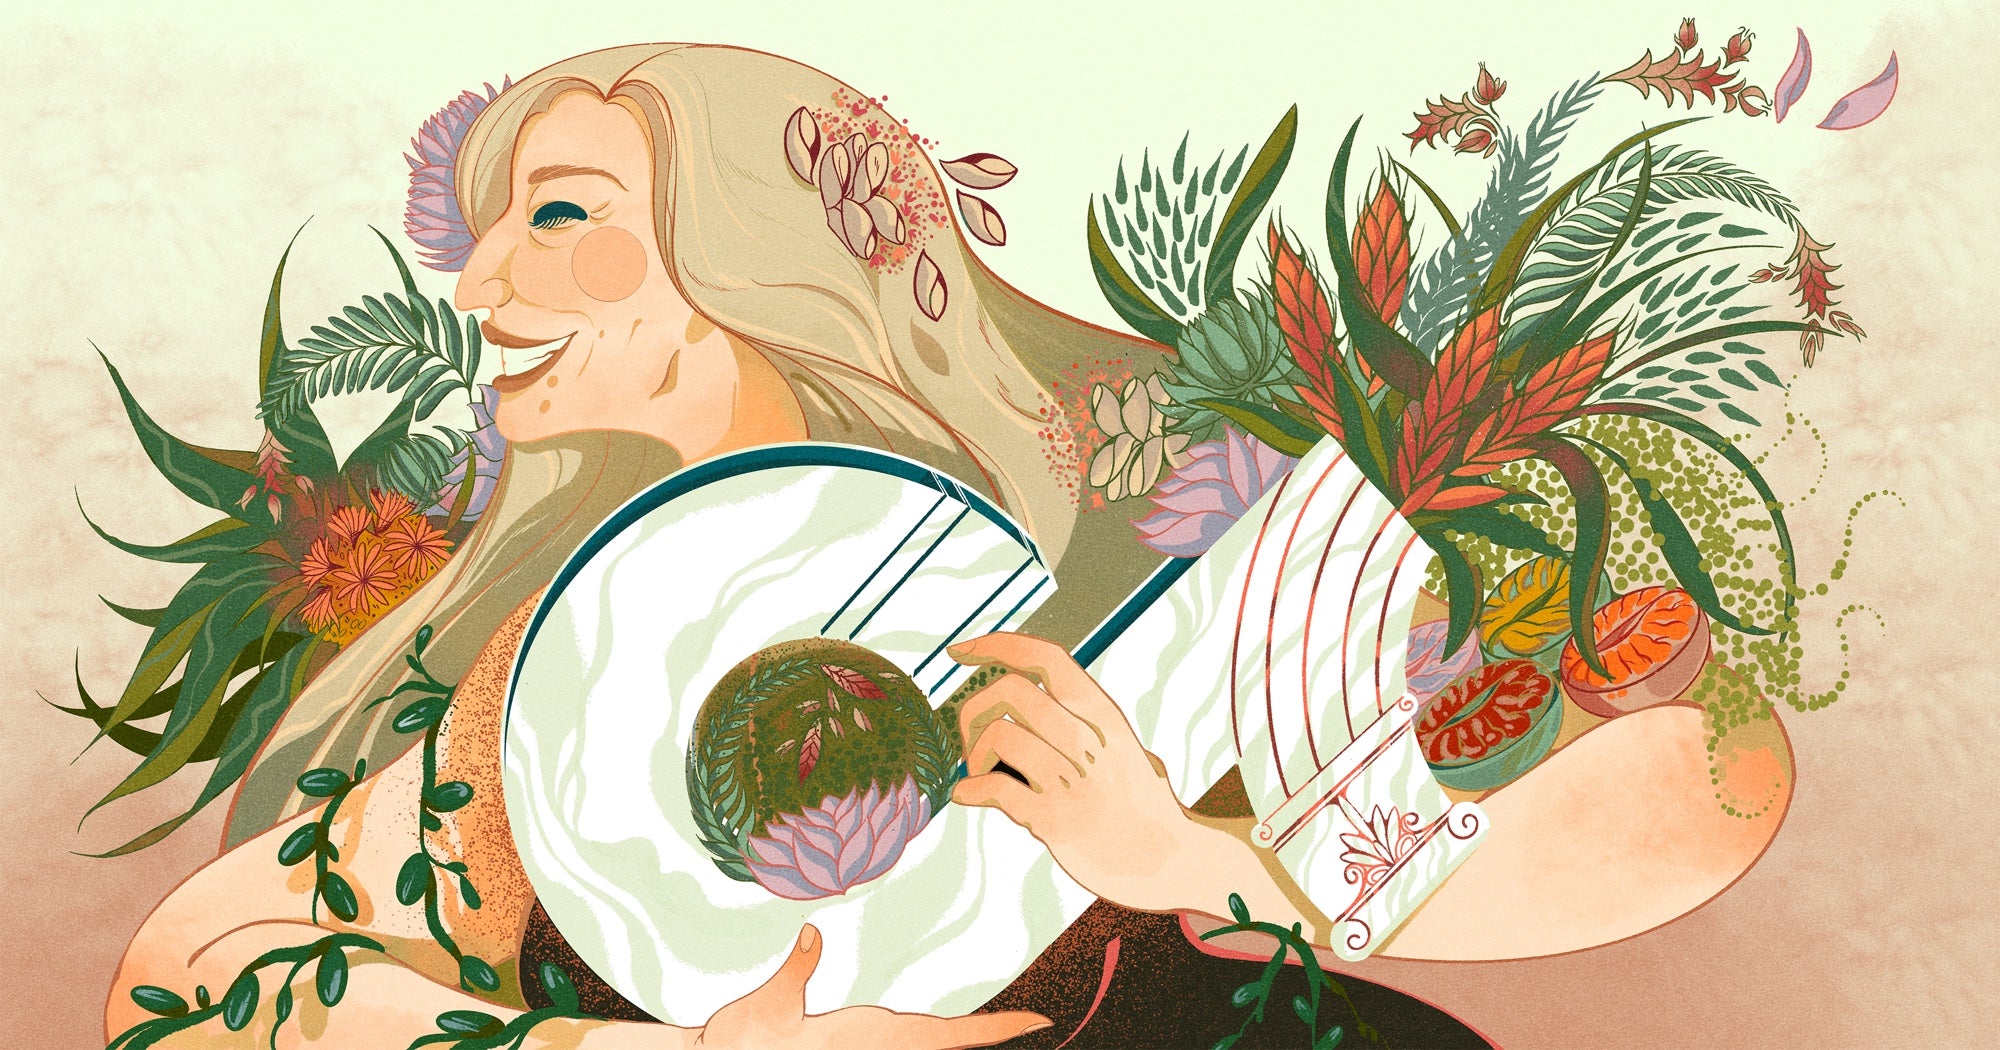 Illustration by Islenia Mil depicting "TikTok for business"—a woman holds a vase shaped like the TikTok logo full of plants